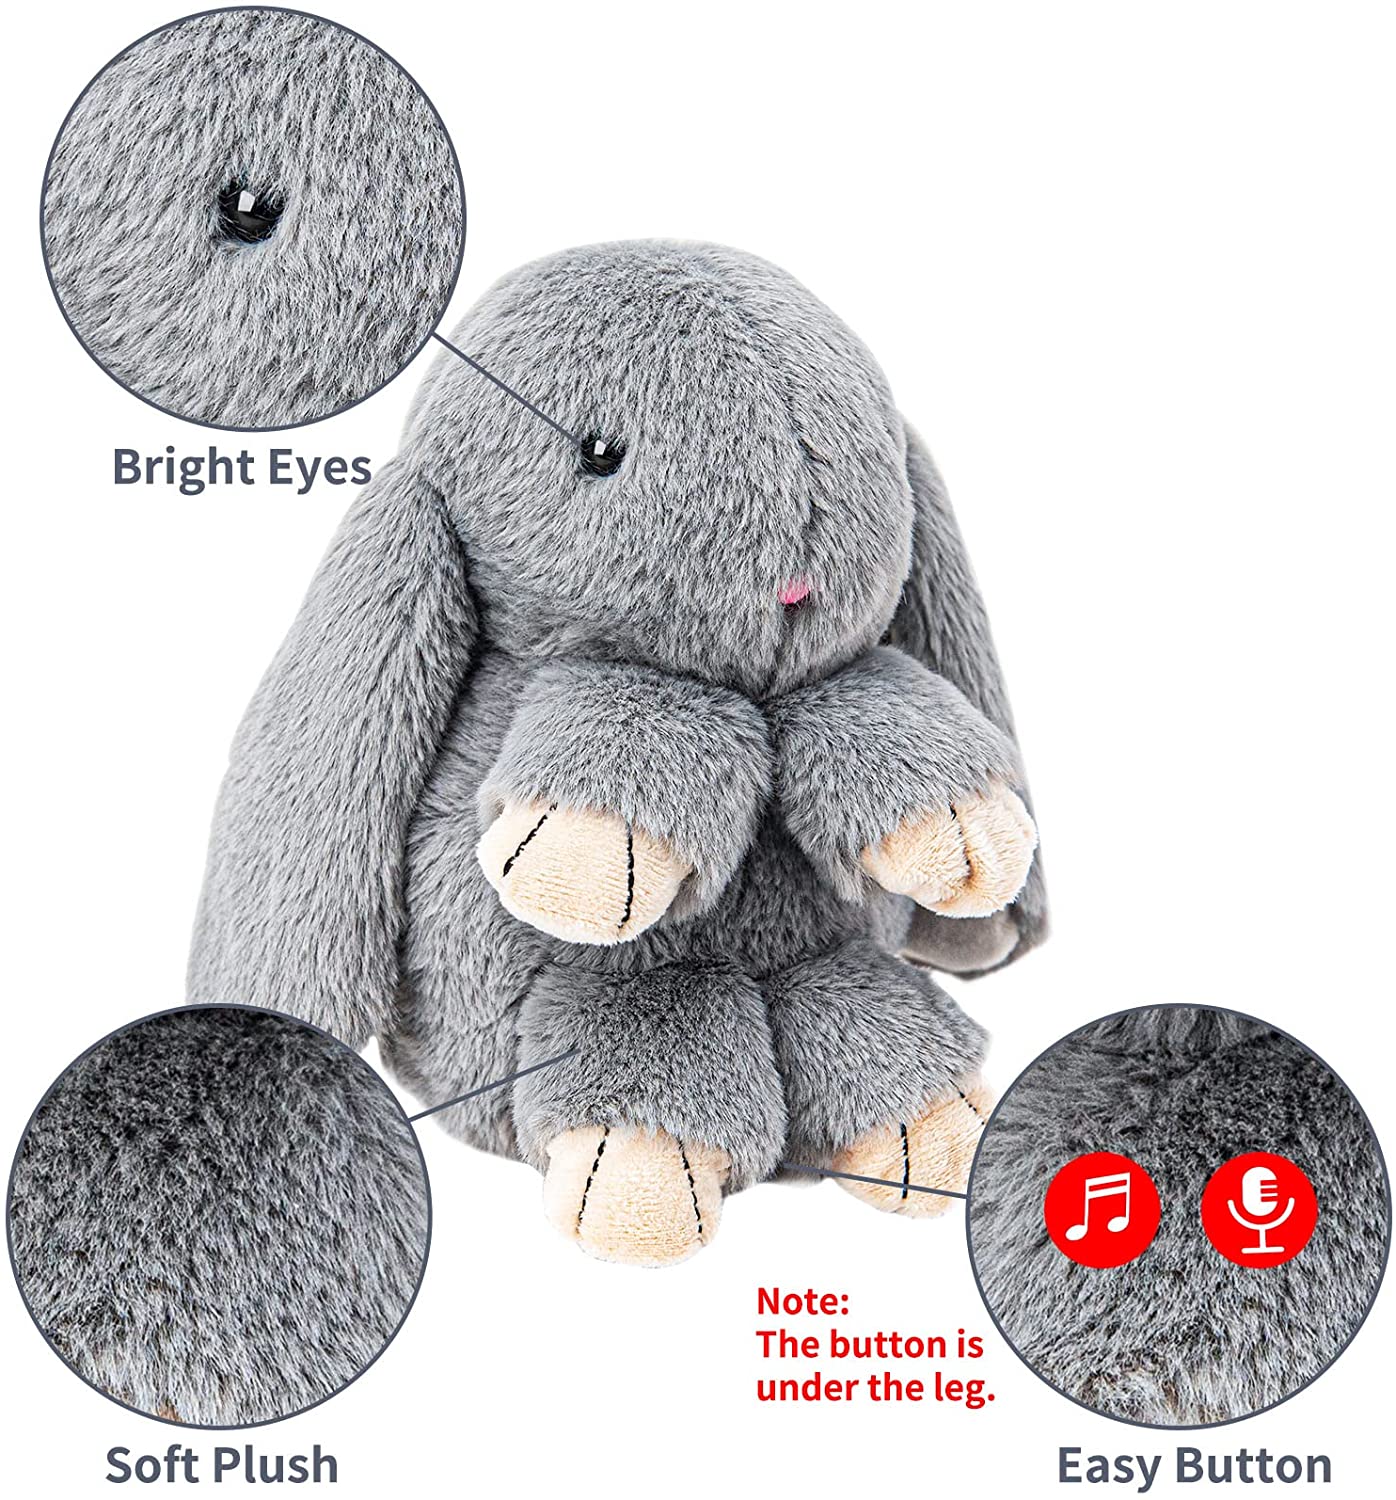 Talking Bunny Toys For Kids, Repeats What You Say, Interactive Stuffed Plush Animal Talking Toy, Singing, Dancing And Shaking For Girls Boys